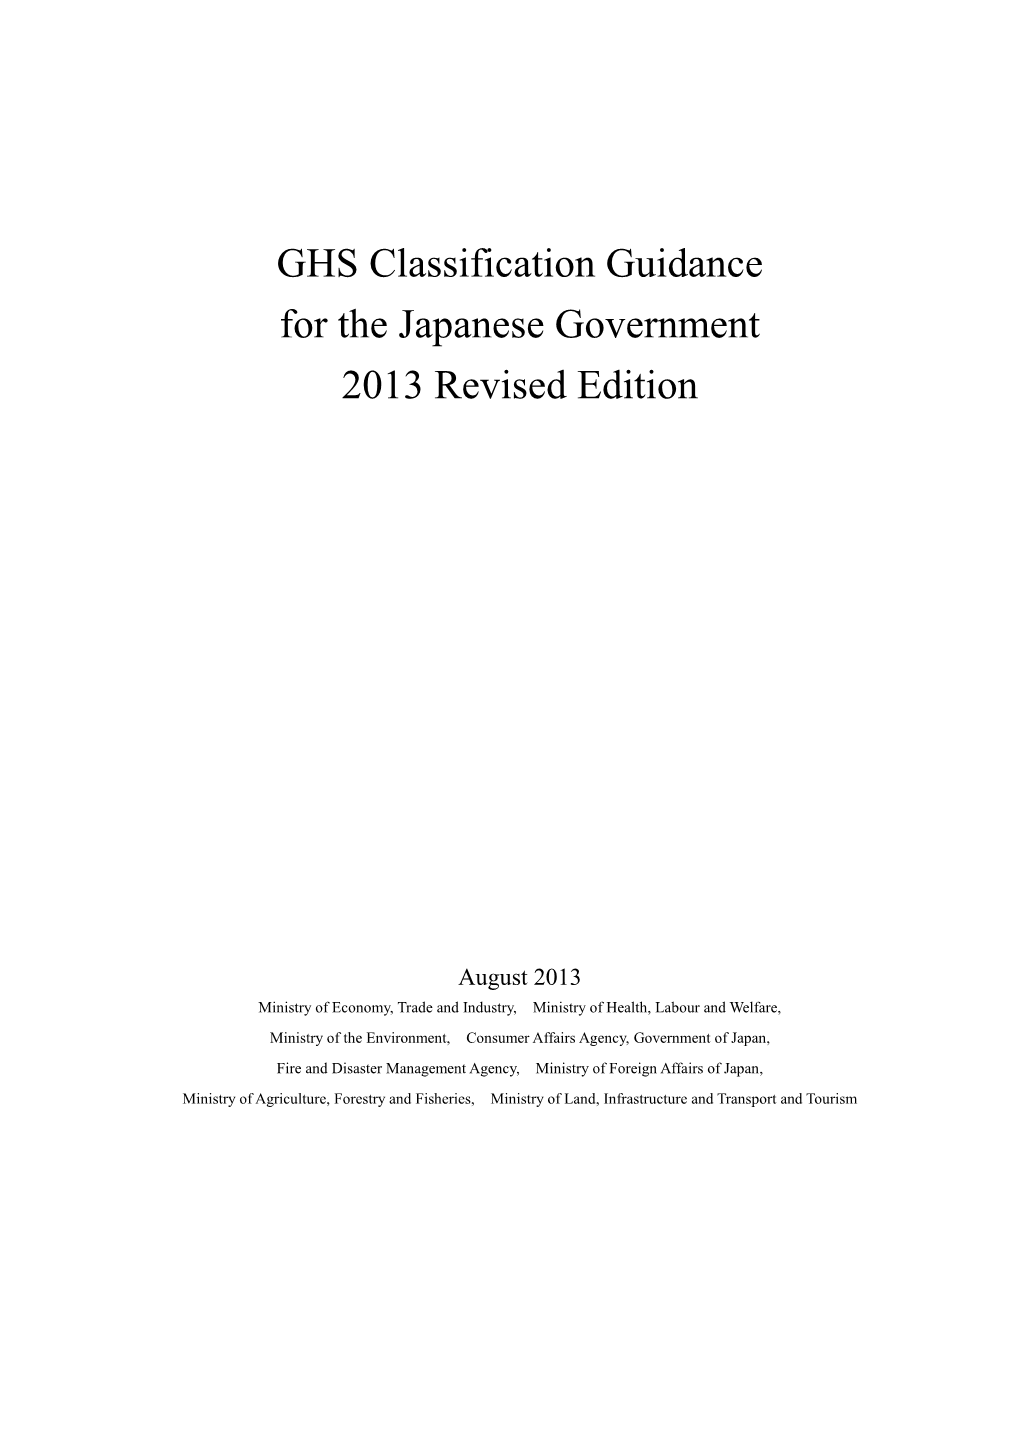 GHS Classification Guidance for the Japanese Government 2013 Revised Edition